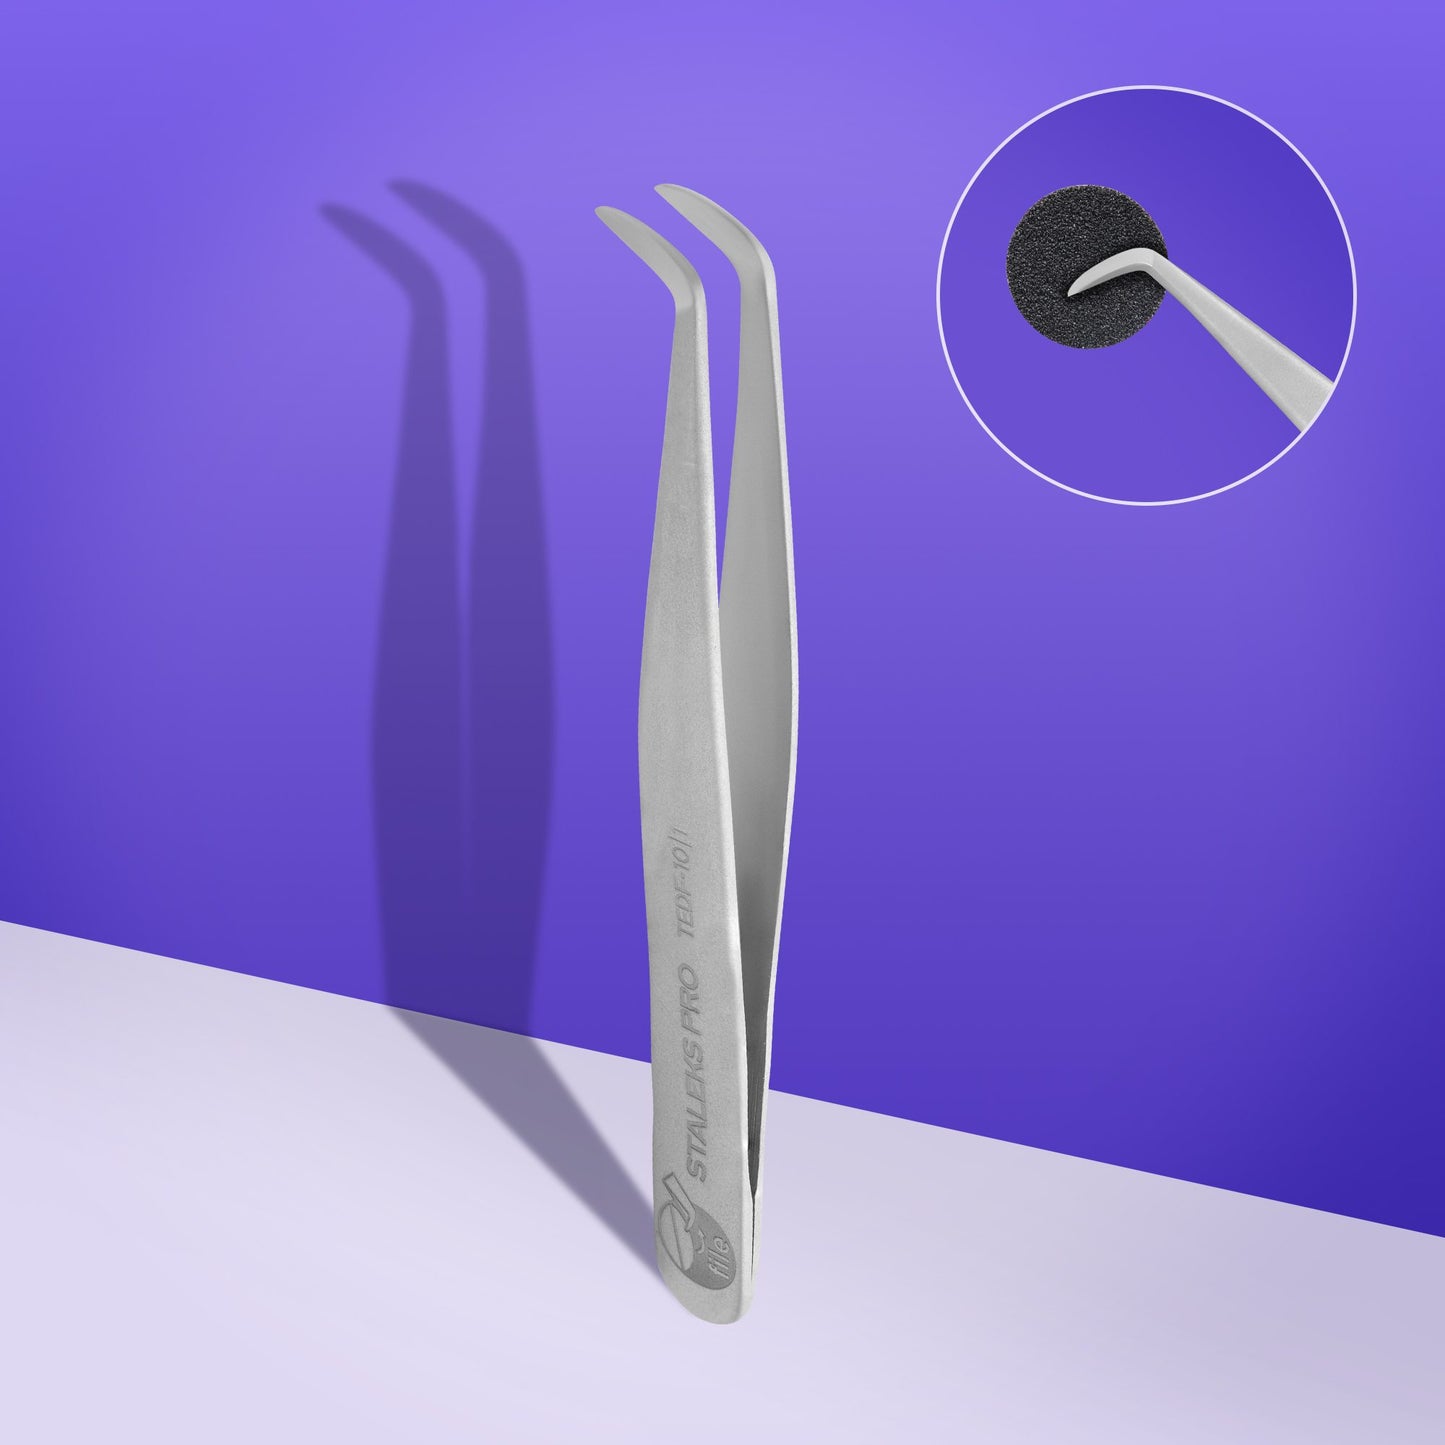 STALEKS Tweezers for work with disposable files